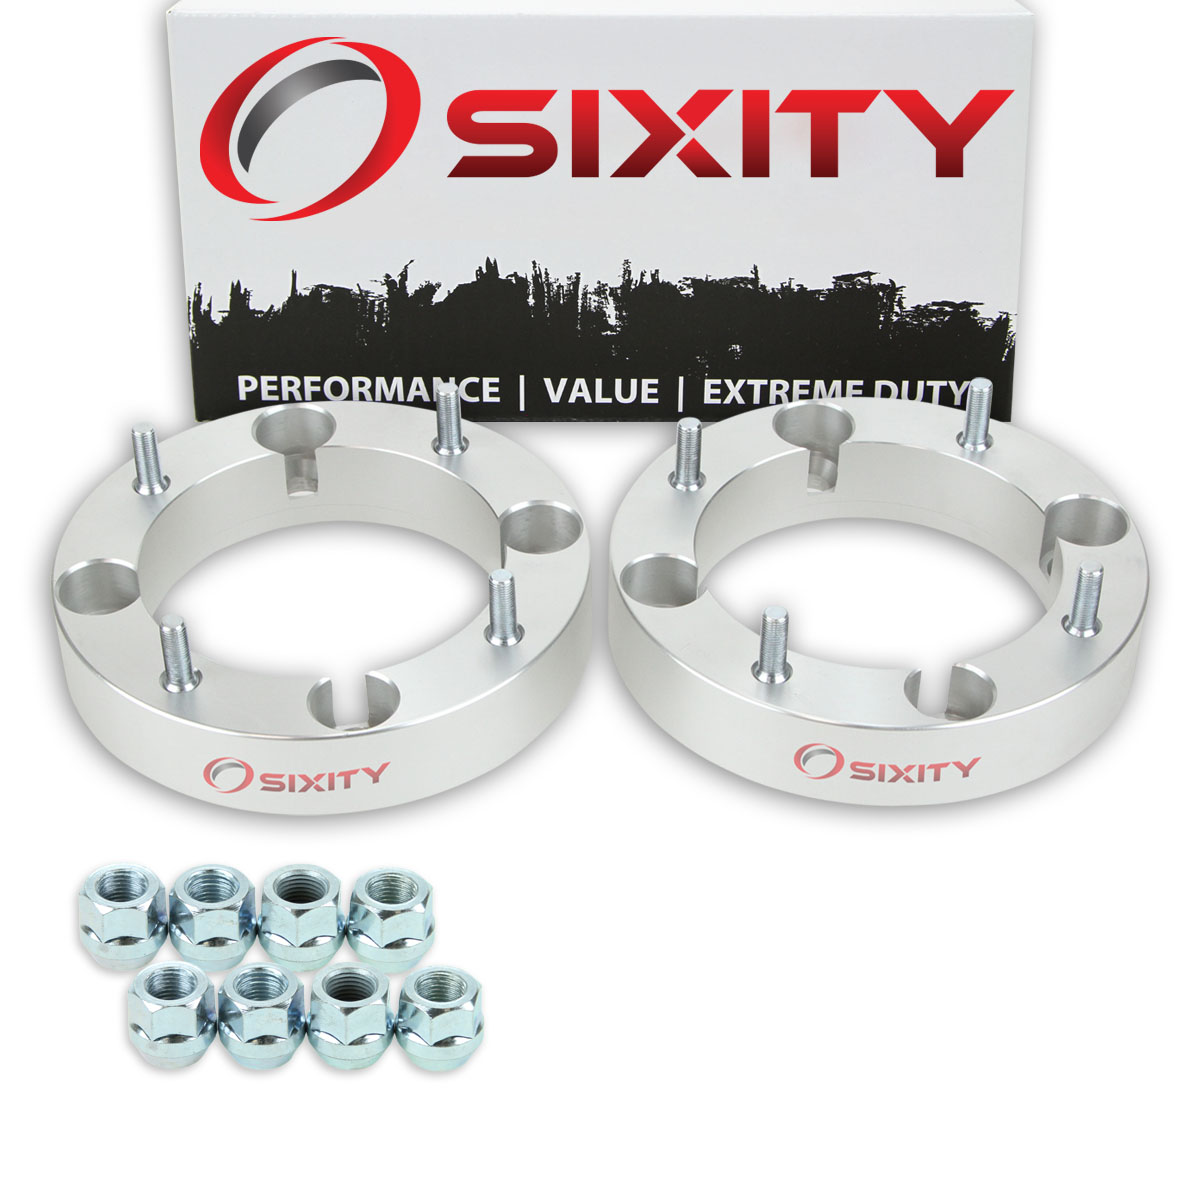 Sixity 2 pc 1.5 Inch 2000-2006 Polaris Magnum 325 4/156 Rear Wheel Spacers